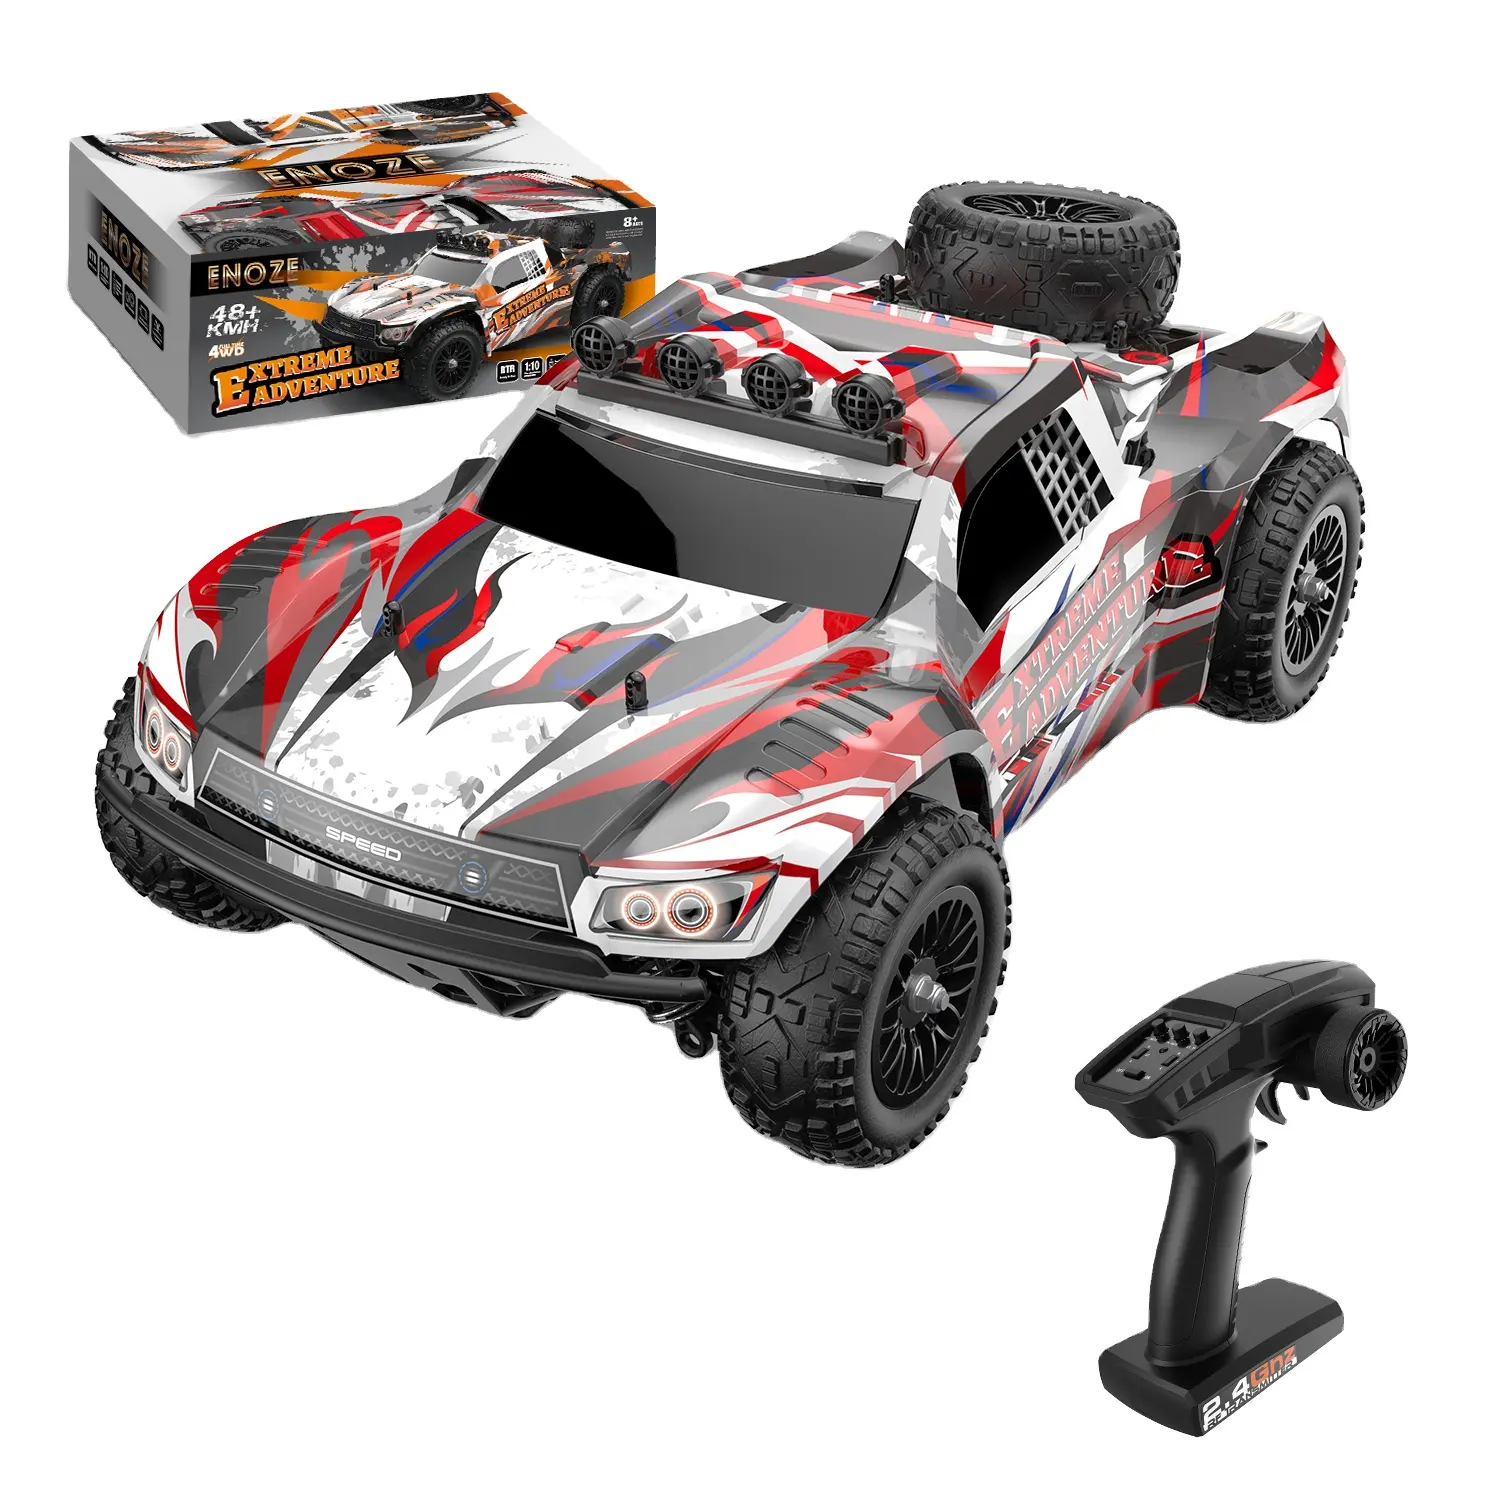 11.1V-1500MAH rc car kit 100 km high speed 4*4 off road for adults Waterproof brushless motor violent truck